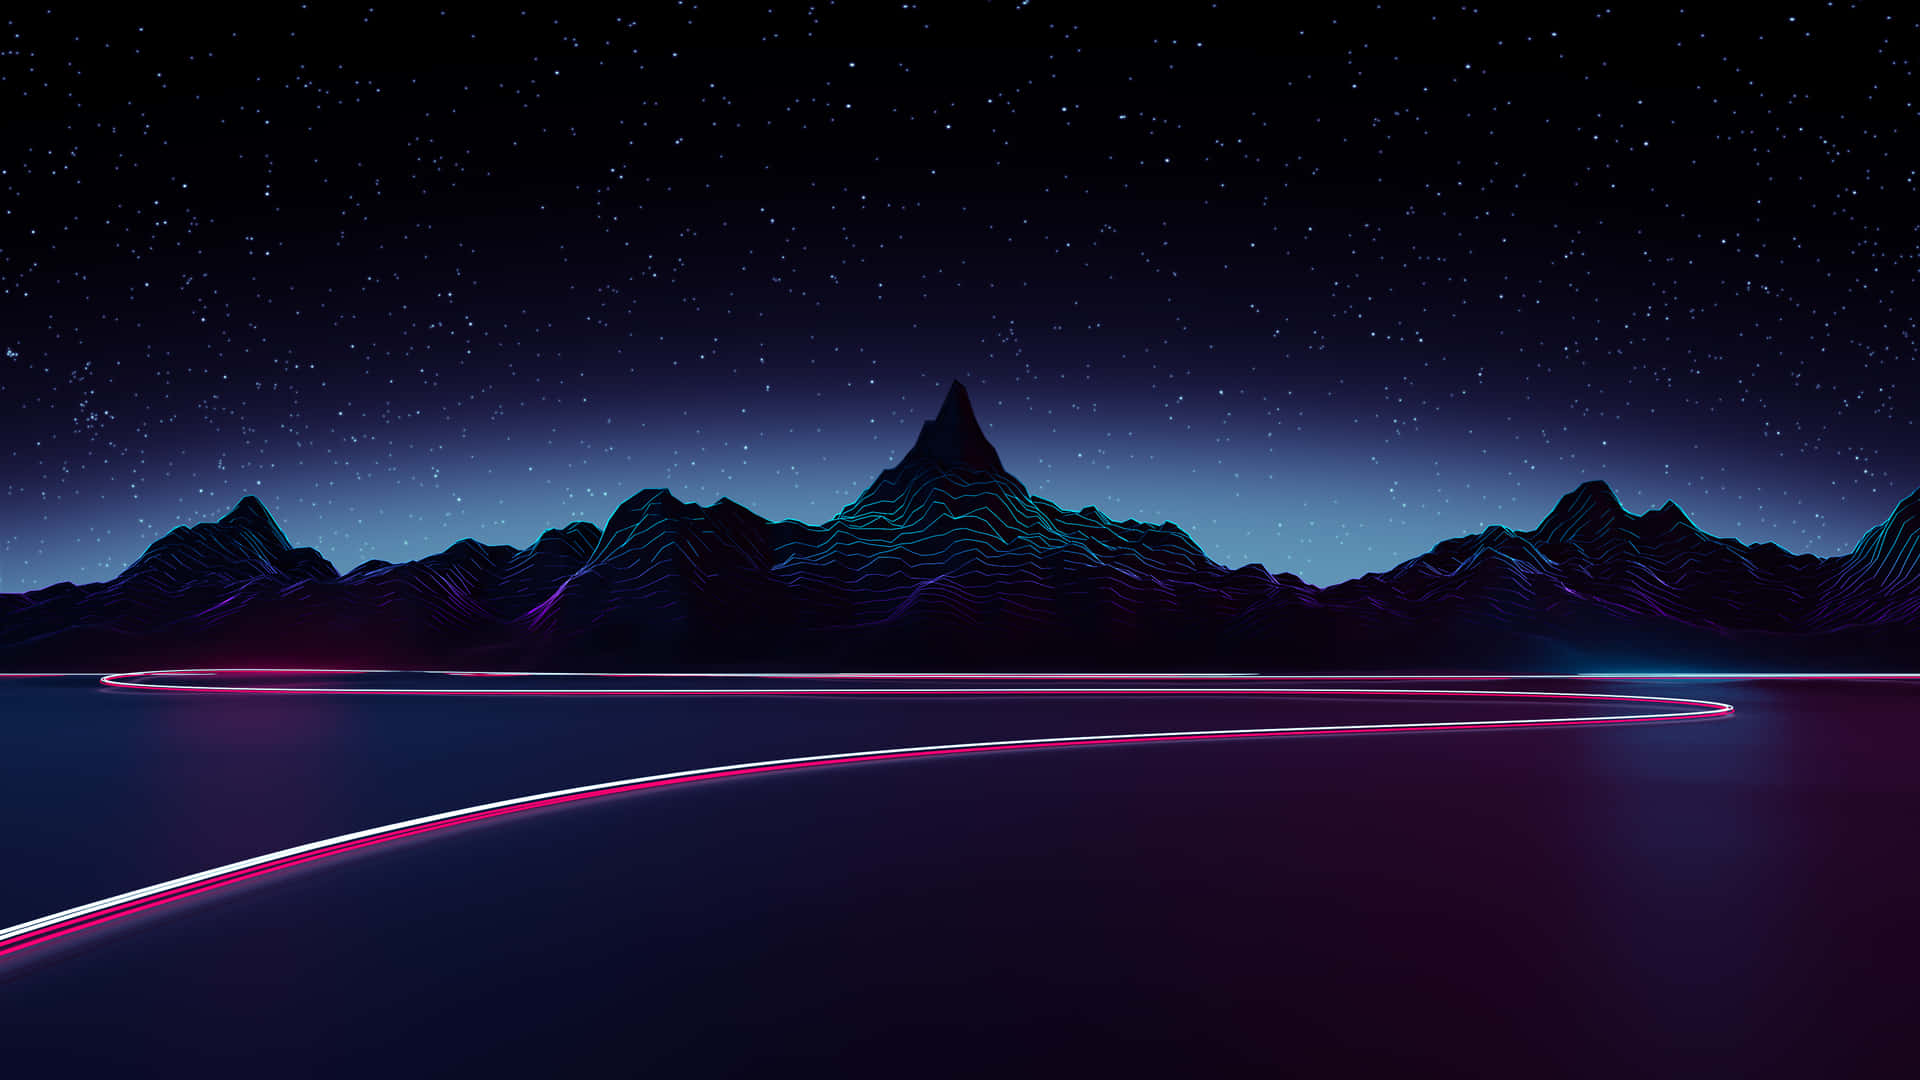 A Neon Light Is Shining Over A Mountain And Lake Wallpaper